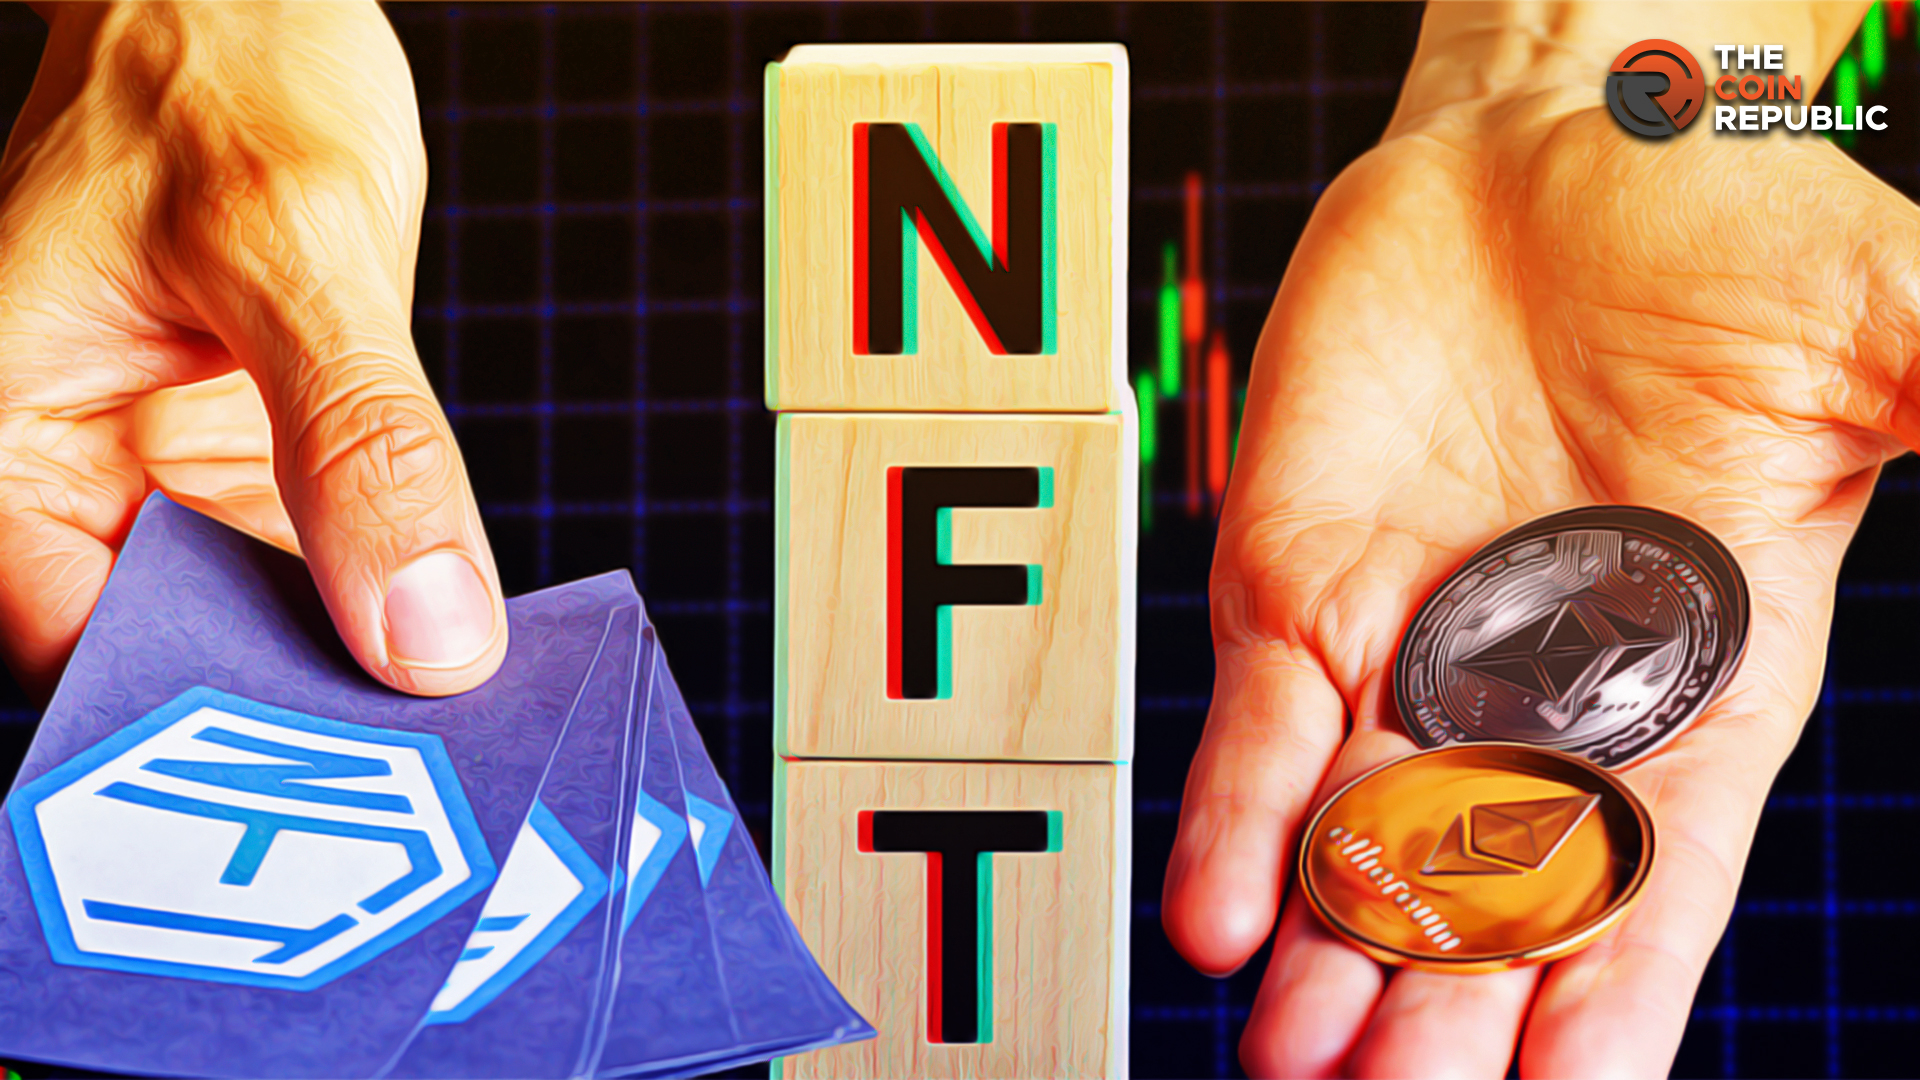 Know Different Royalty Programs on Various NFT Marketplaces